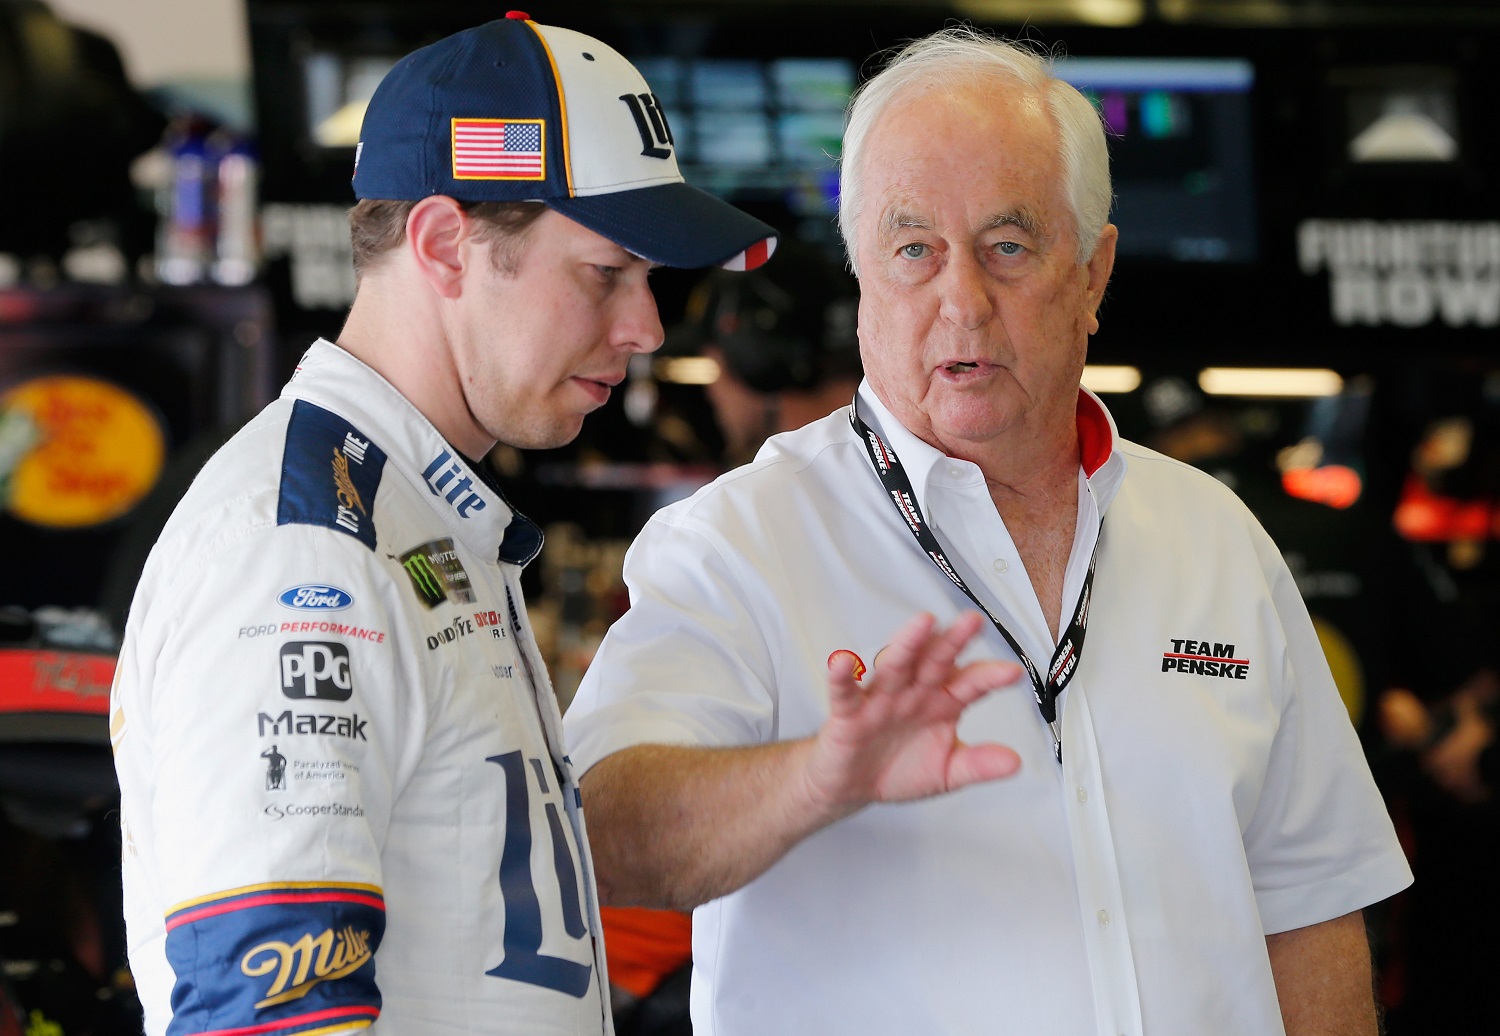 Brad Keselowski talks with team owner Roger Penske in the garage area during practice for the 59th Annual Daytona 500 at Daytona International Speedway on Feb. 24, 2017.